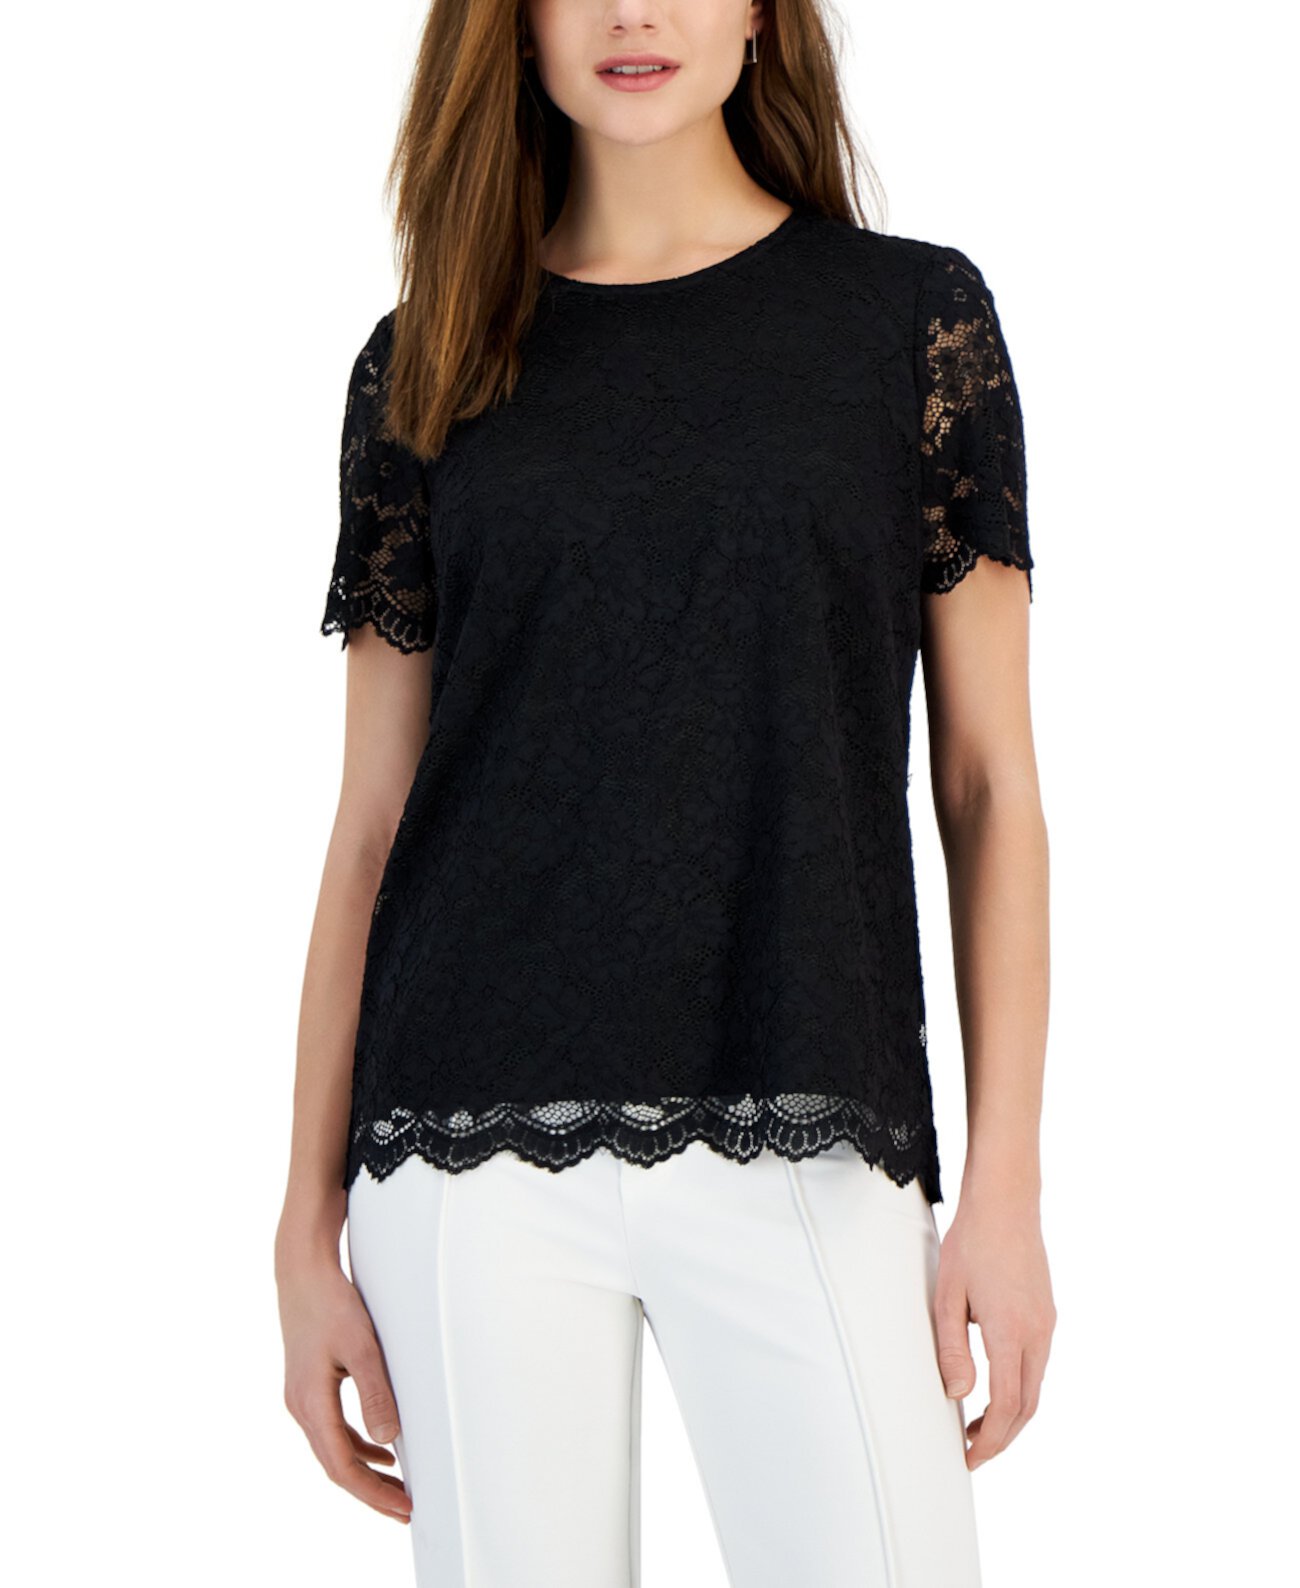 Women's Lace Short-Sleeve Top Tahari by ASL